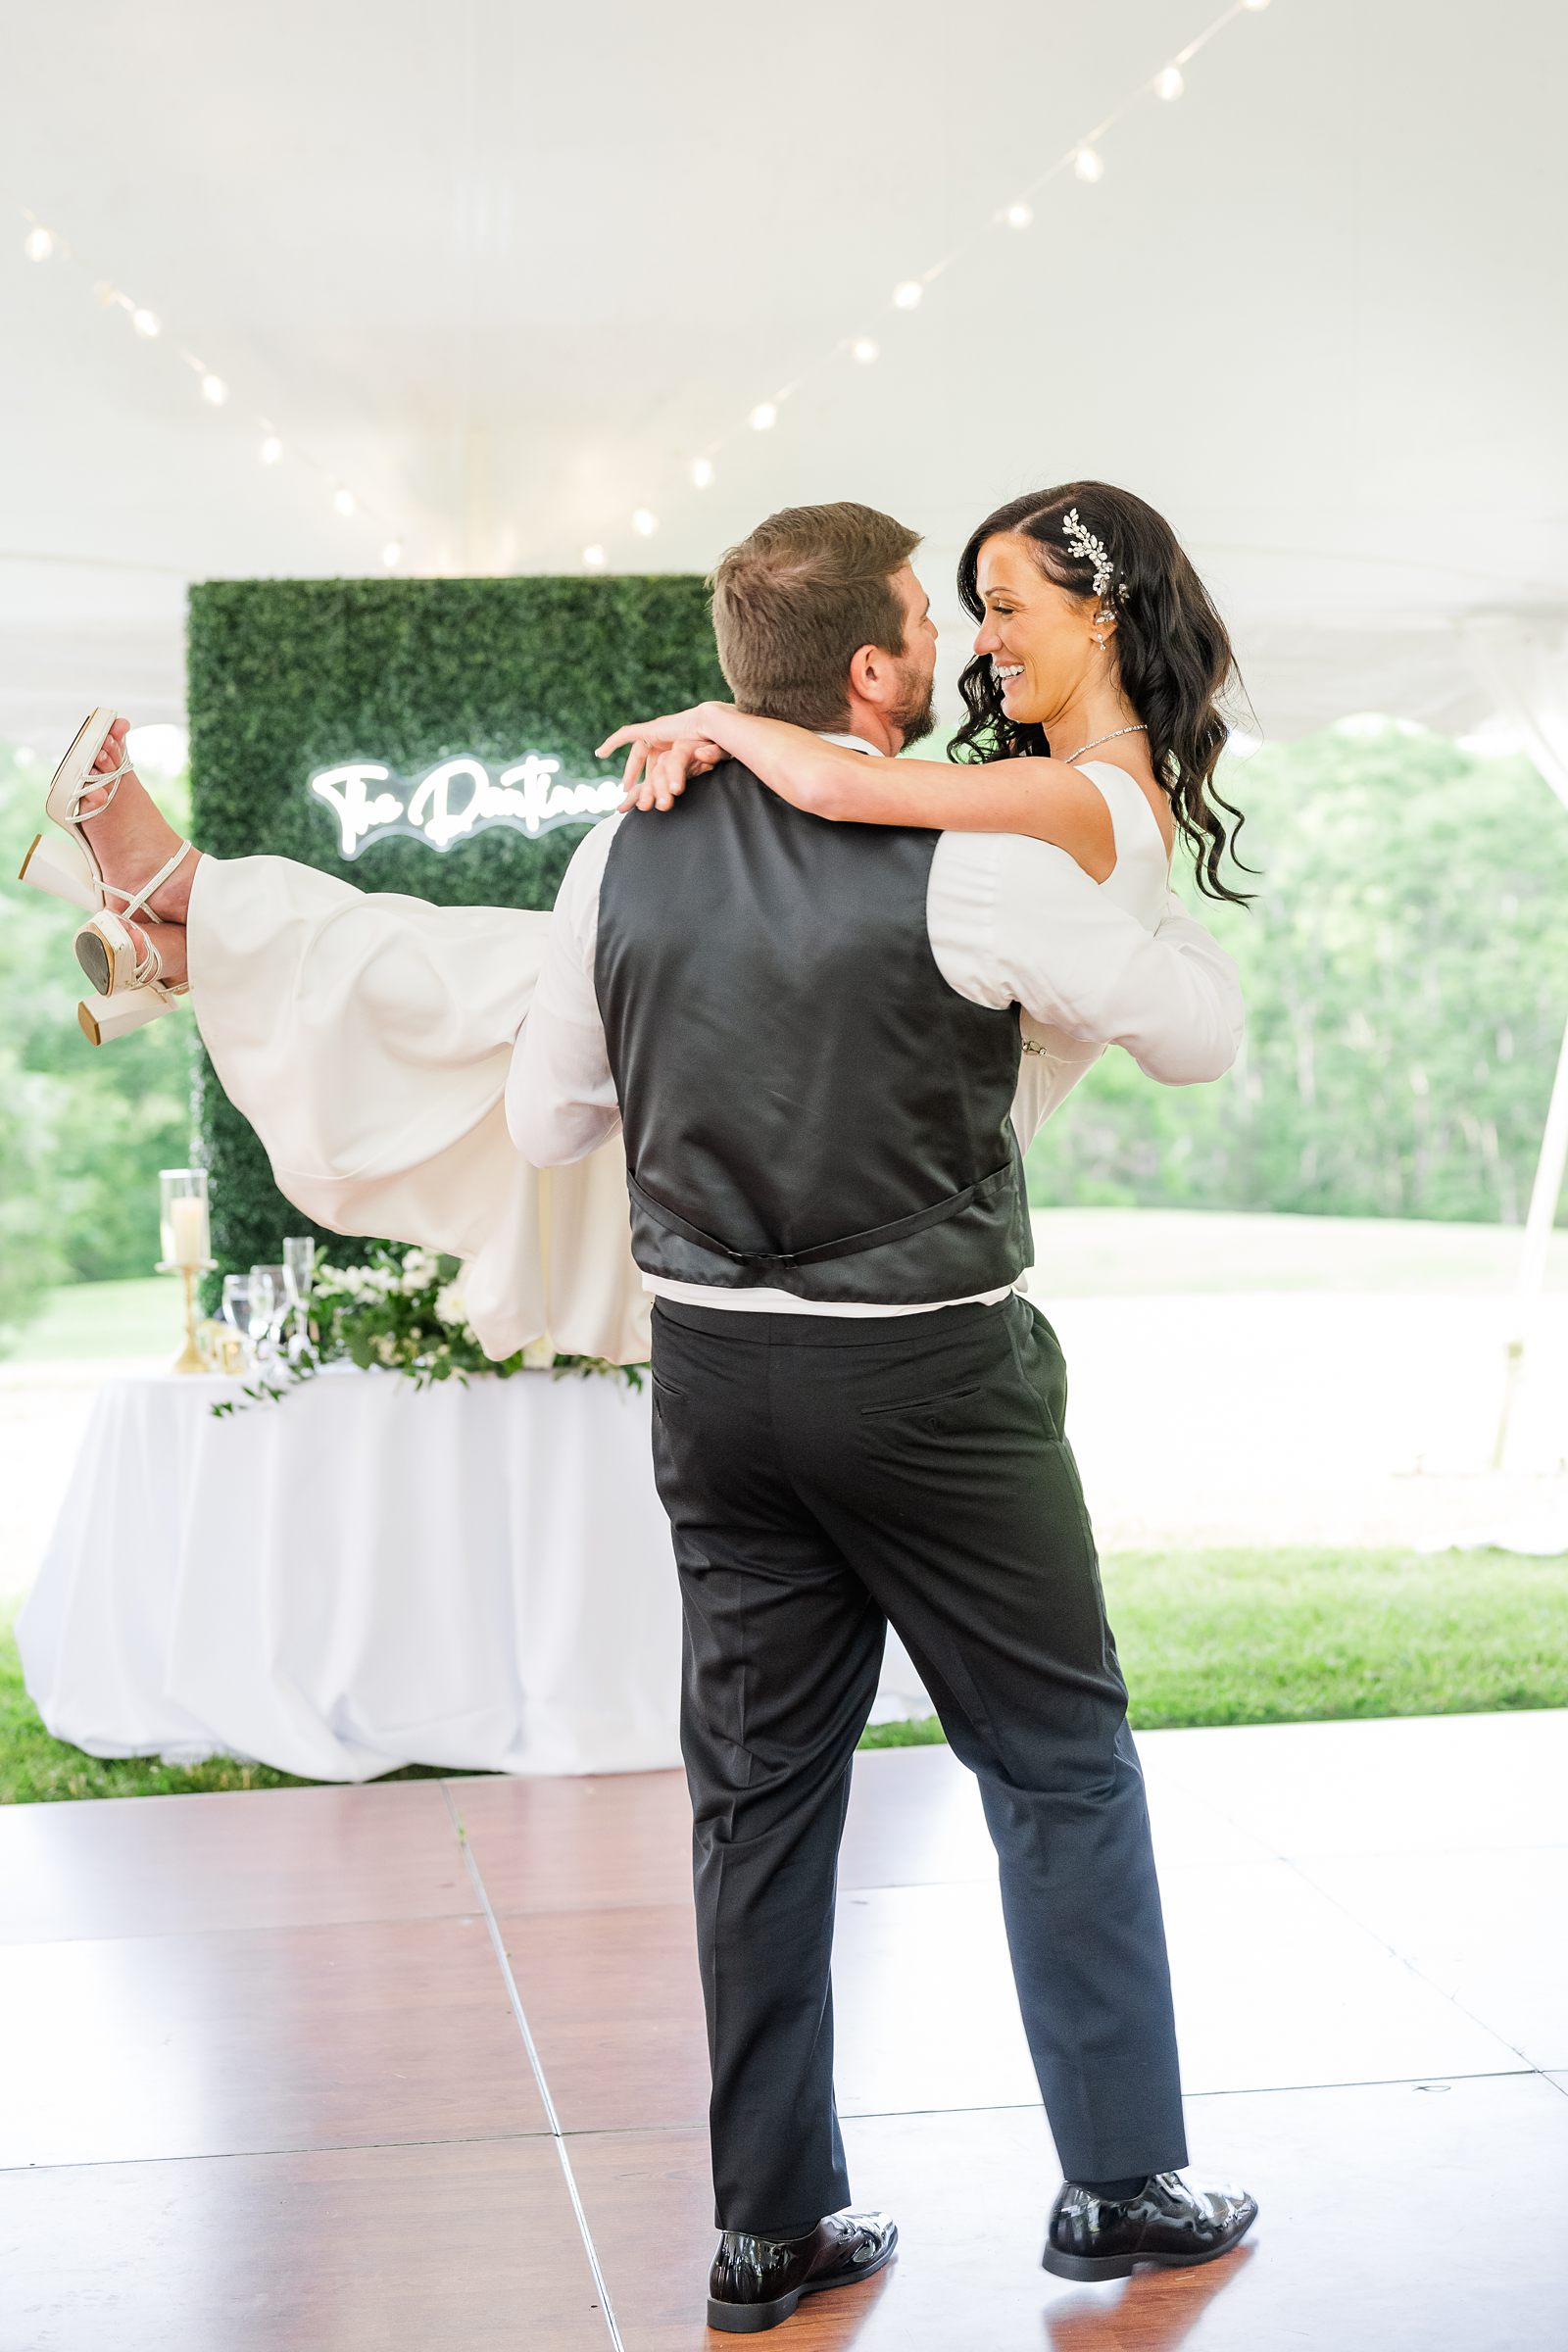 Bride and groom first dance at spring wedding reception by virginia wedding photographer 